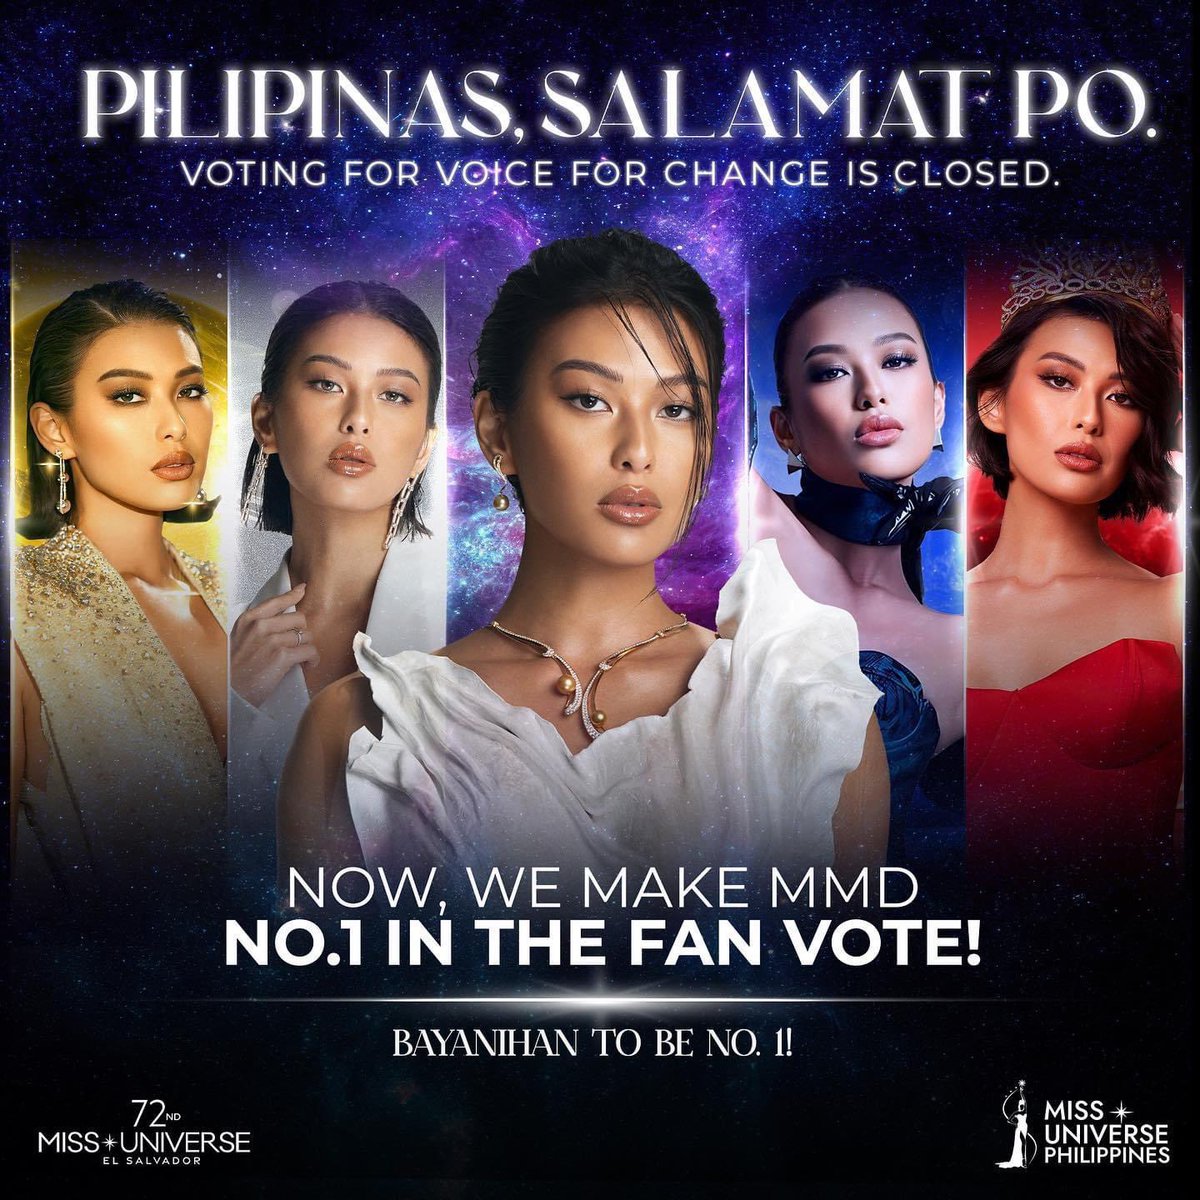 MASS VOTES NOW FOR MMD! 🇵🇭

To vote in the Fan Vote:
1️⃣ Download the Miss Universe App
2️⃣ Go to the Vote tab
3️⃣ Vote PHILIPPINES

Only a few more days until The Most Beautiful Day in the Universe! Let’s do this, Pilipinas! 🇵🇭

#MichelleDee #ForDEEUniverse
#HelloUniverse